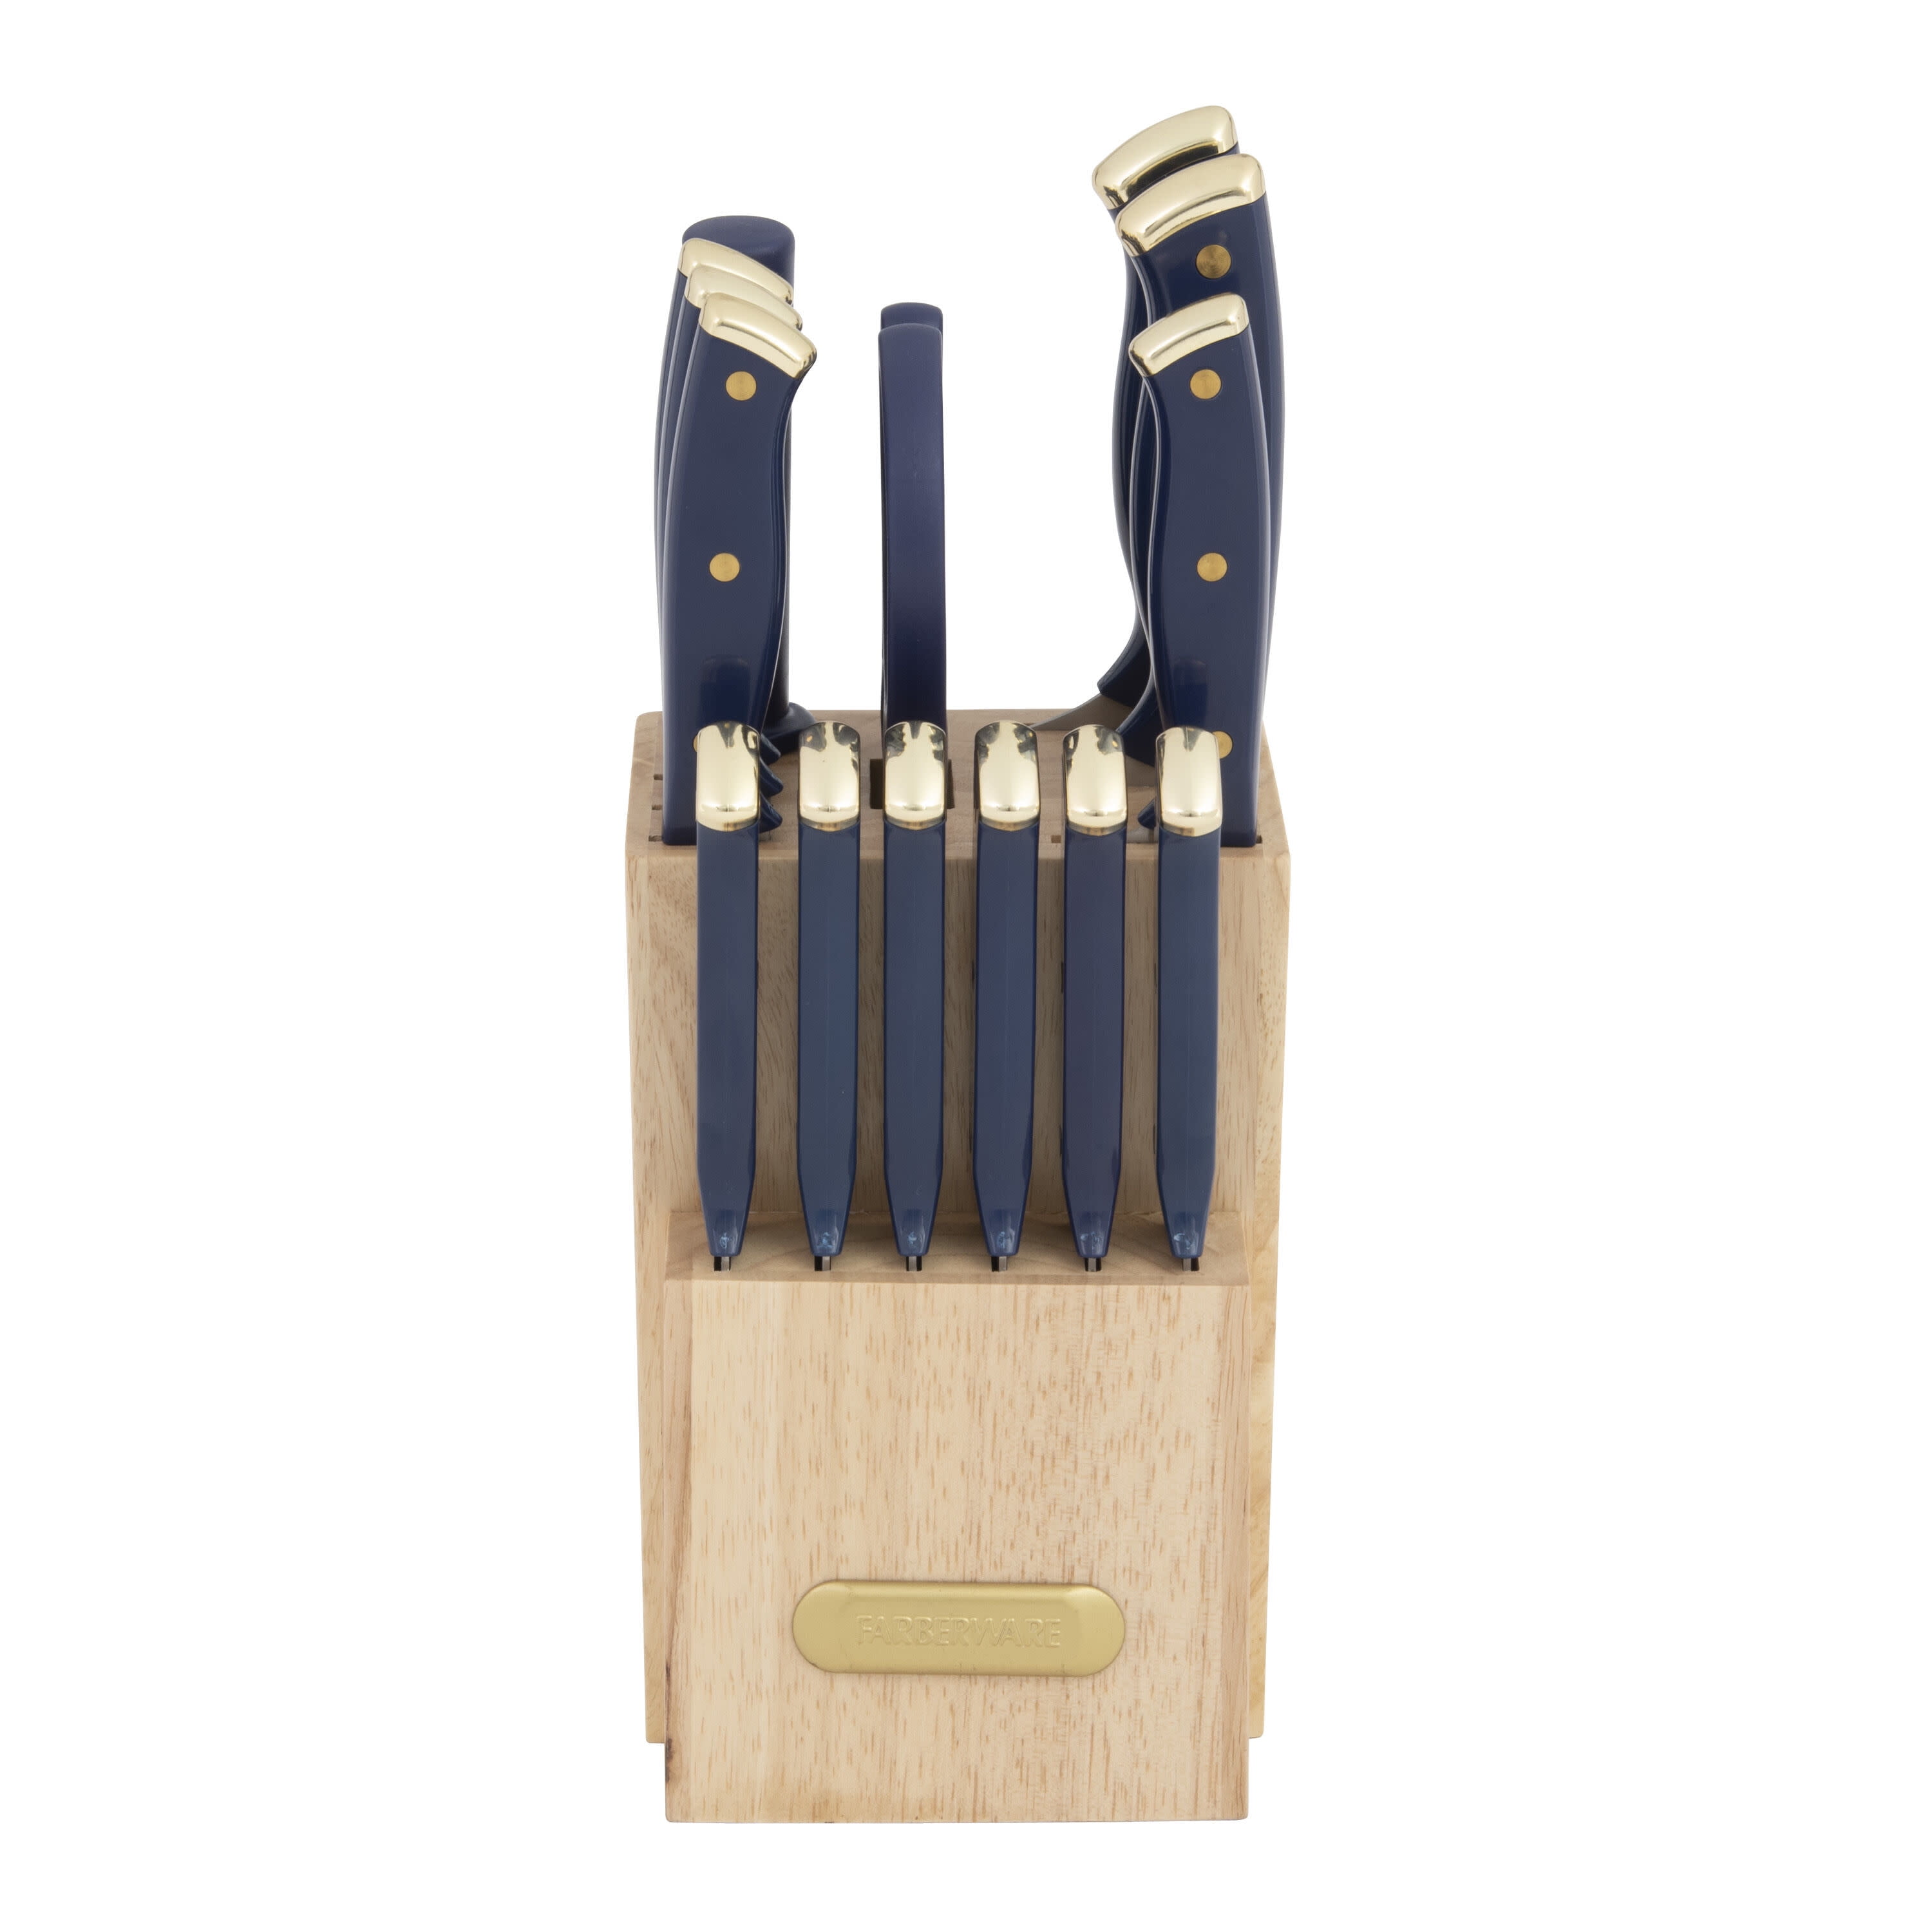 Farberware 15-Piece Forged Triple Riveted Knife Block Set, High